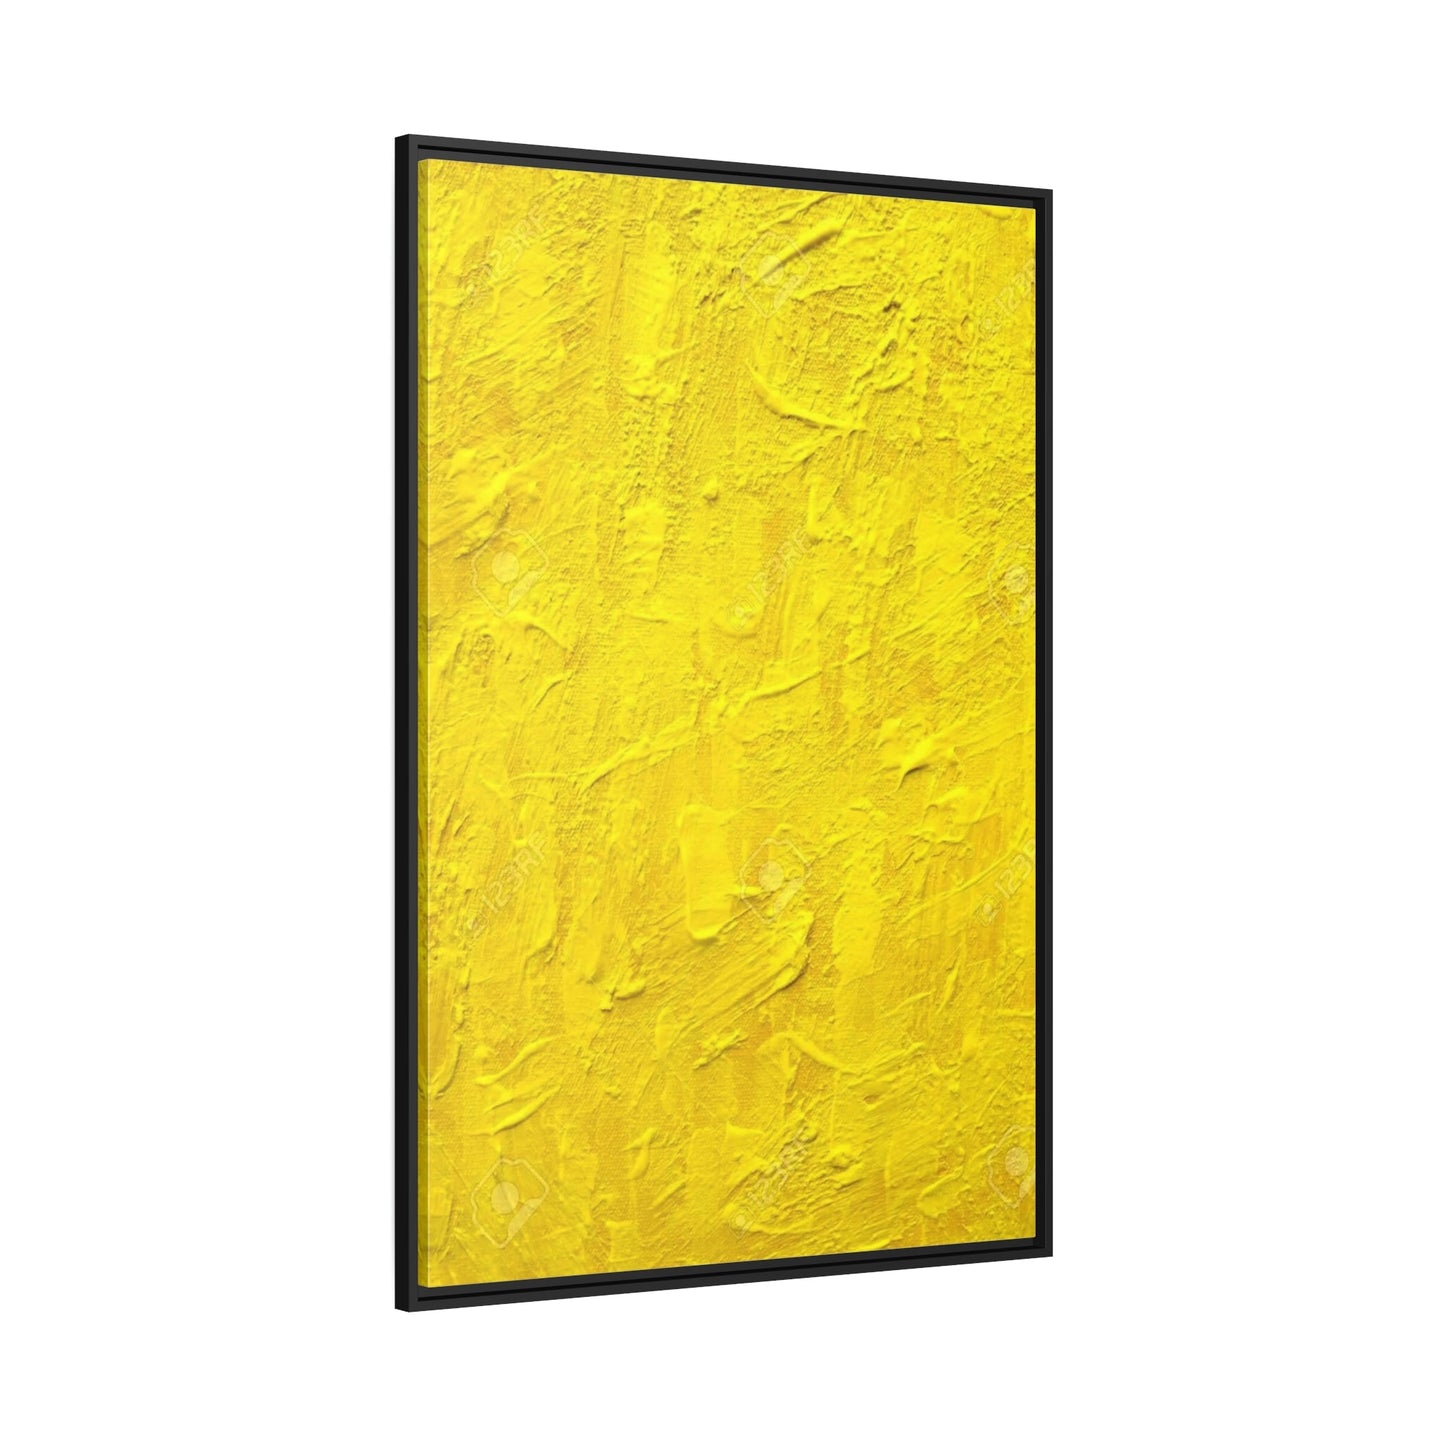 Relaxing and Serene Wall Art Print of a Yellow Color on Natural Canvas